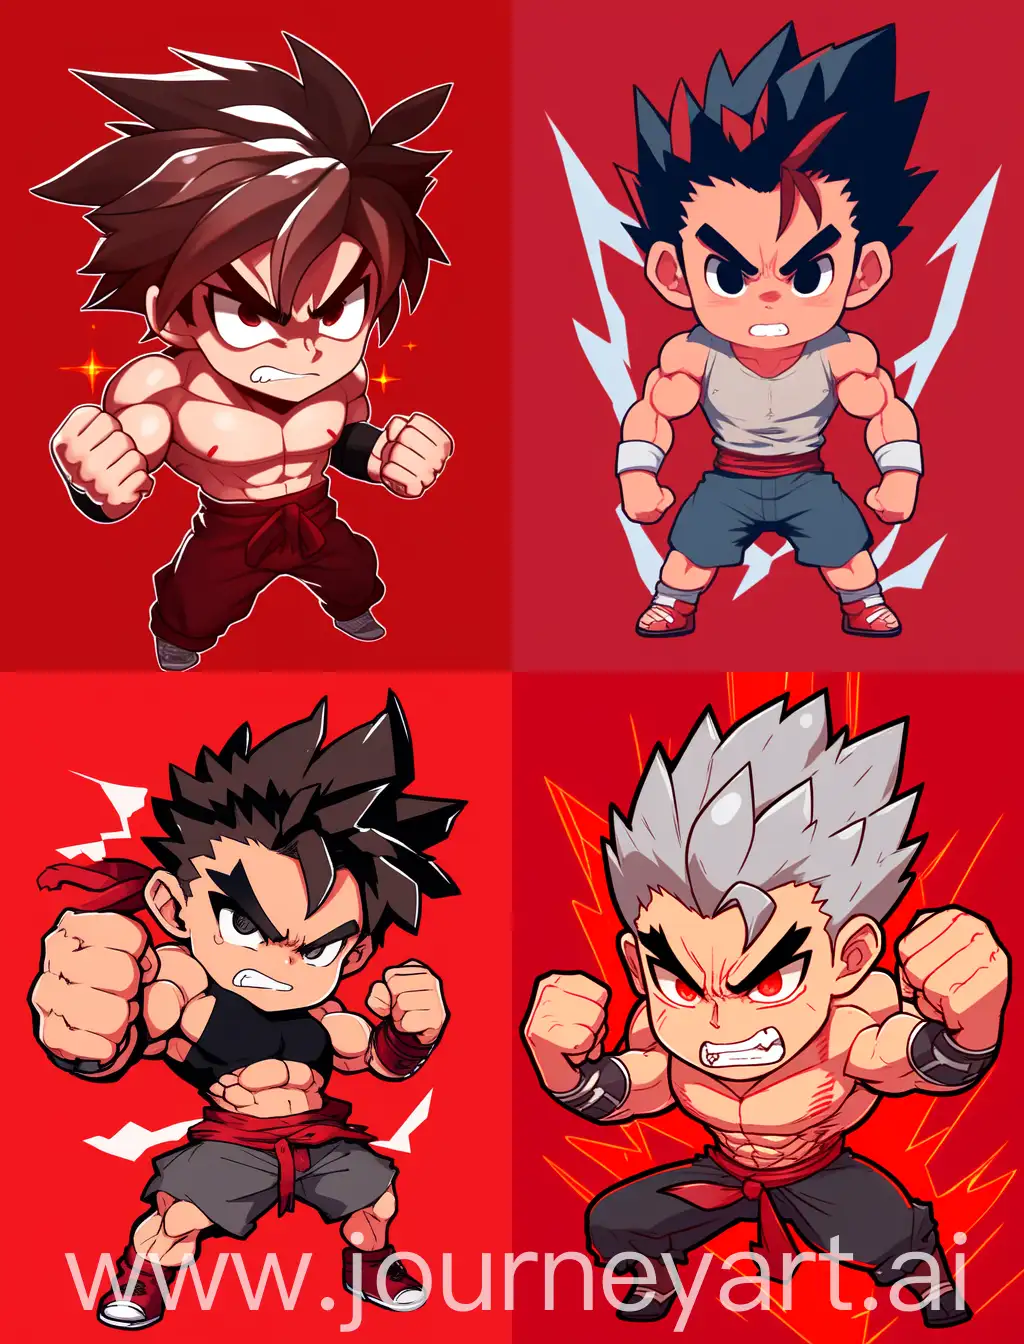 Fierce-Chibi-Anime-Character-Flexing-Muscles-in-Bold-Cartoon-Style-on-Vibrant-Red-Background